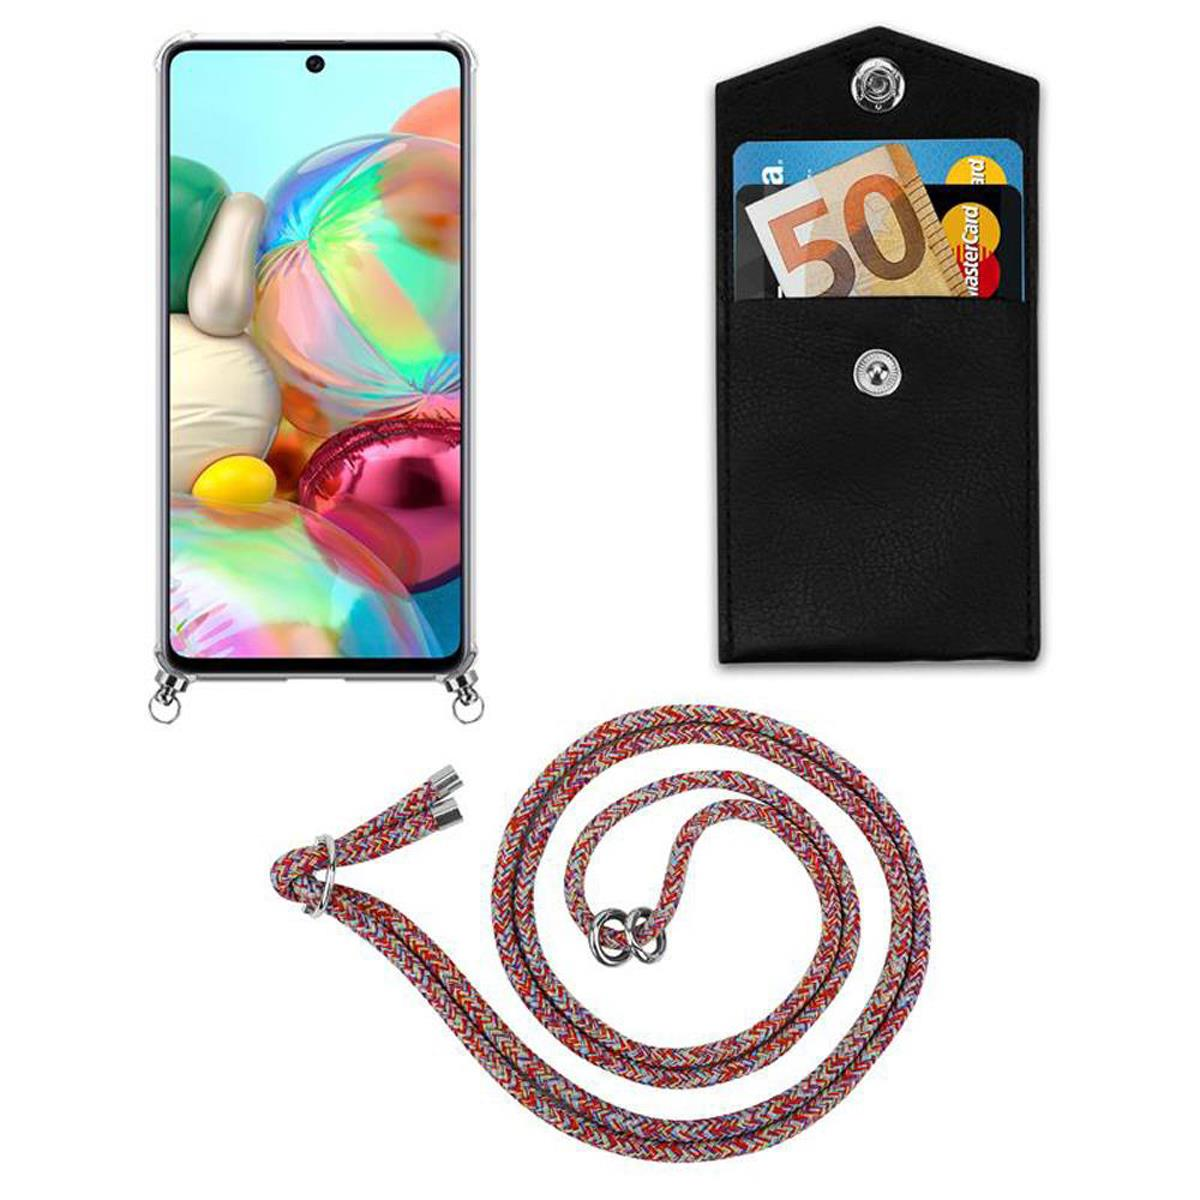 CADORABO Handy abnehmbarer und mit Backcover, A51 Band Kette Galaxy Samsung, Ringen, Silber Hülle, Kordel 5G, COLORFUL PARROT